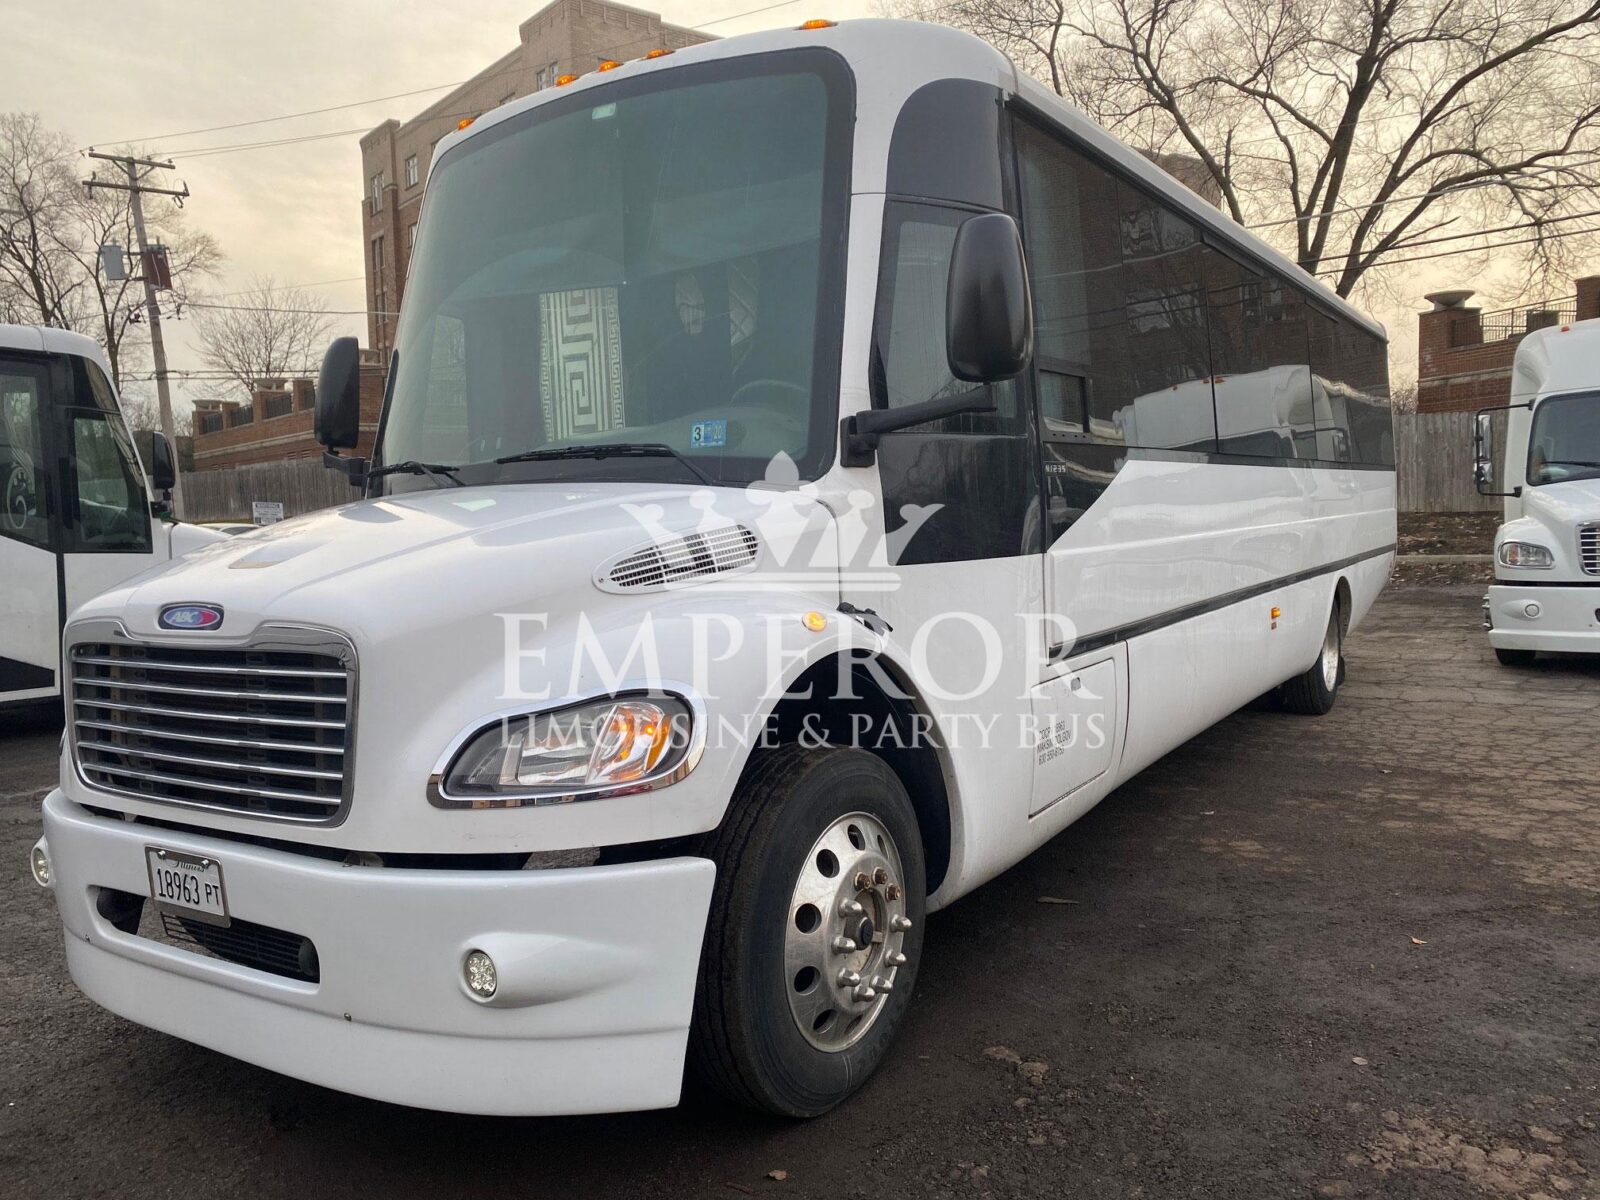 Hire party bus in Bolingbrook